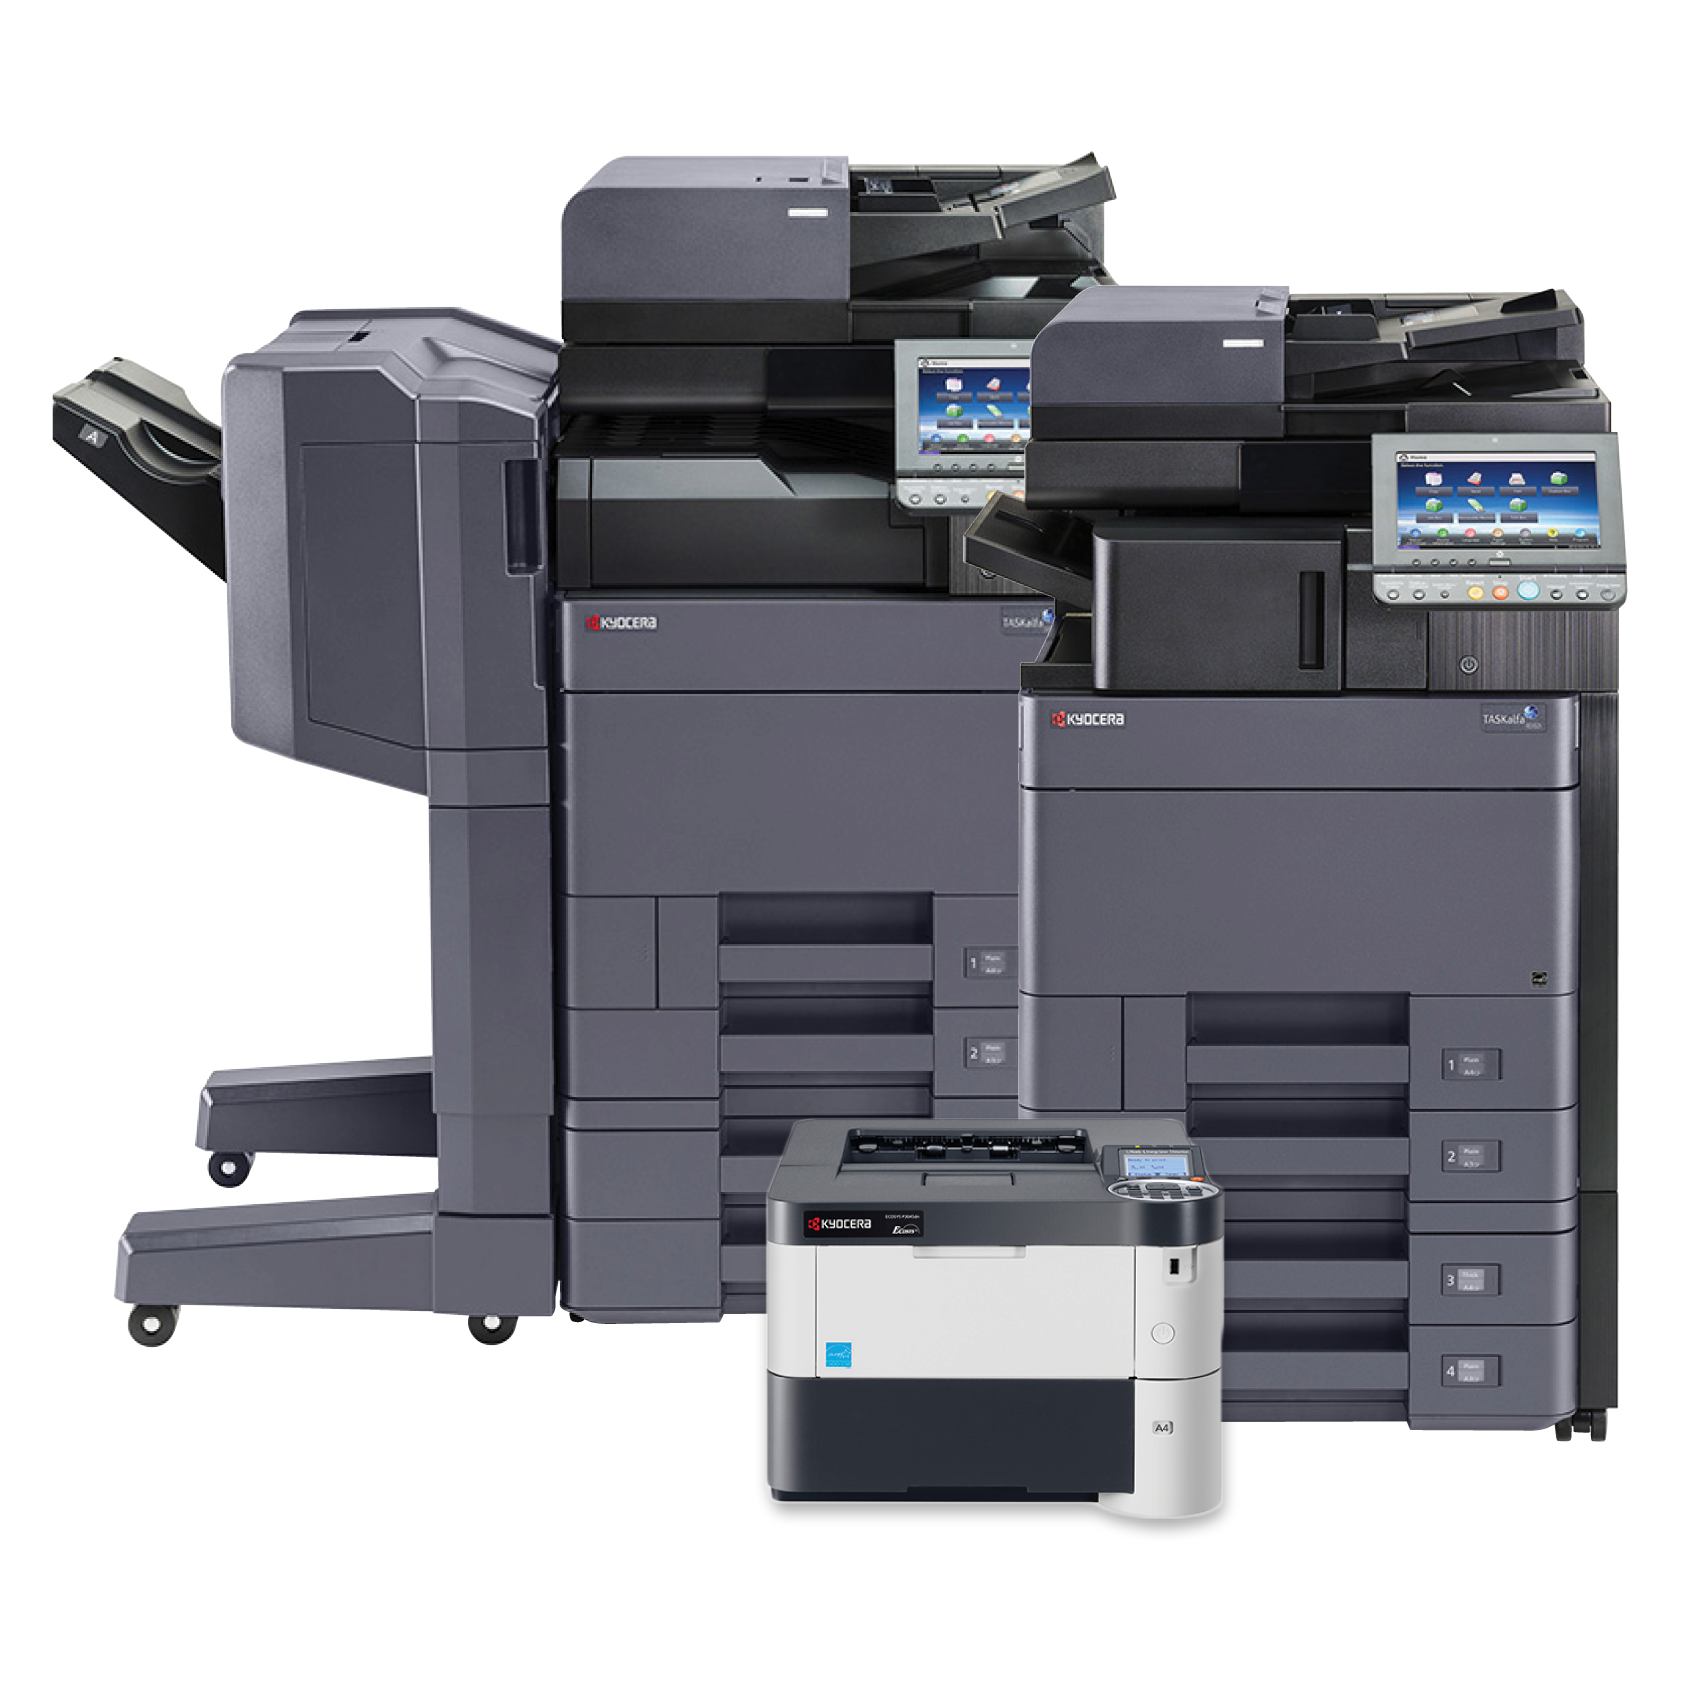 Kyocera copiers and printers offered by American Office Solutions